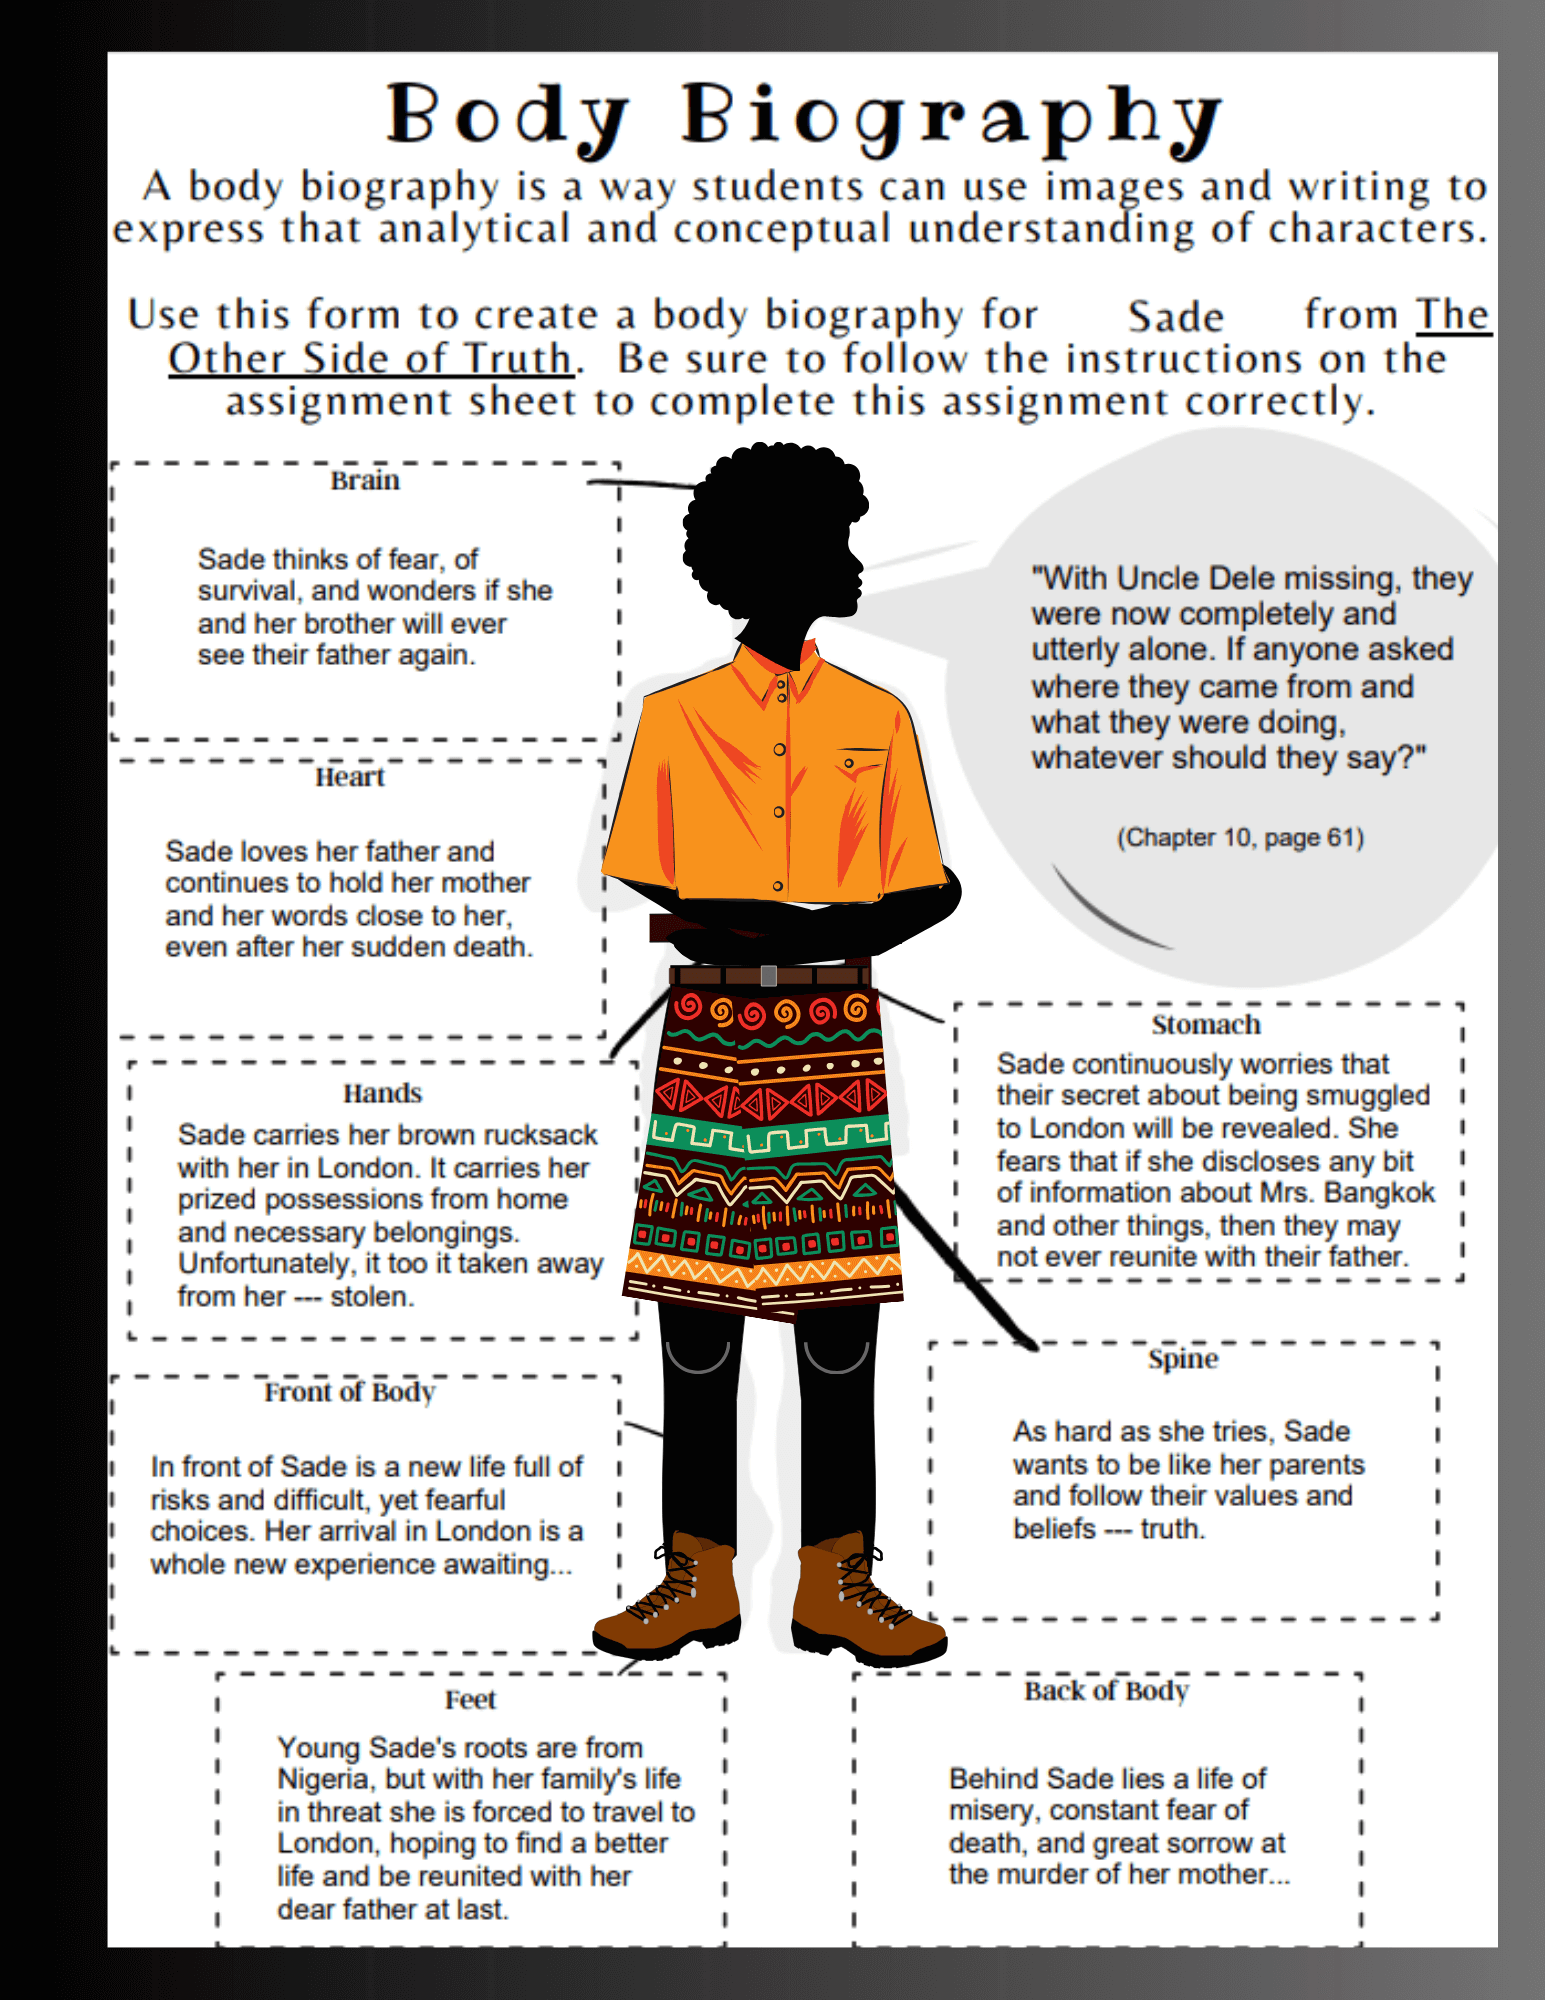 Sade from The Other Side of Truth is depicted in this Reading for the Logic Stage Body Biography.